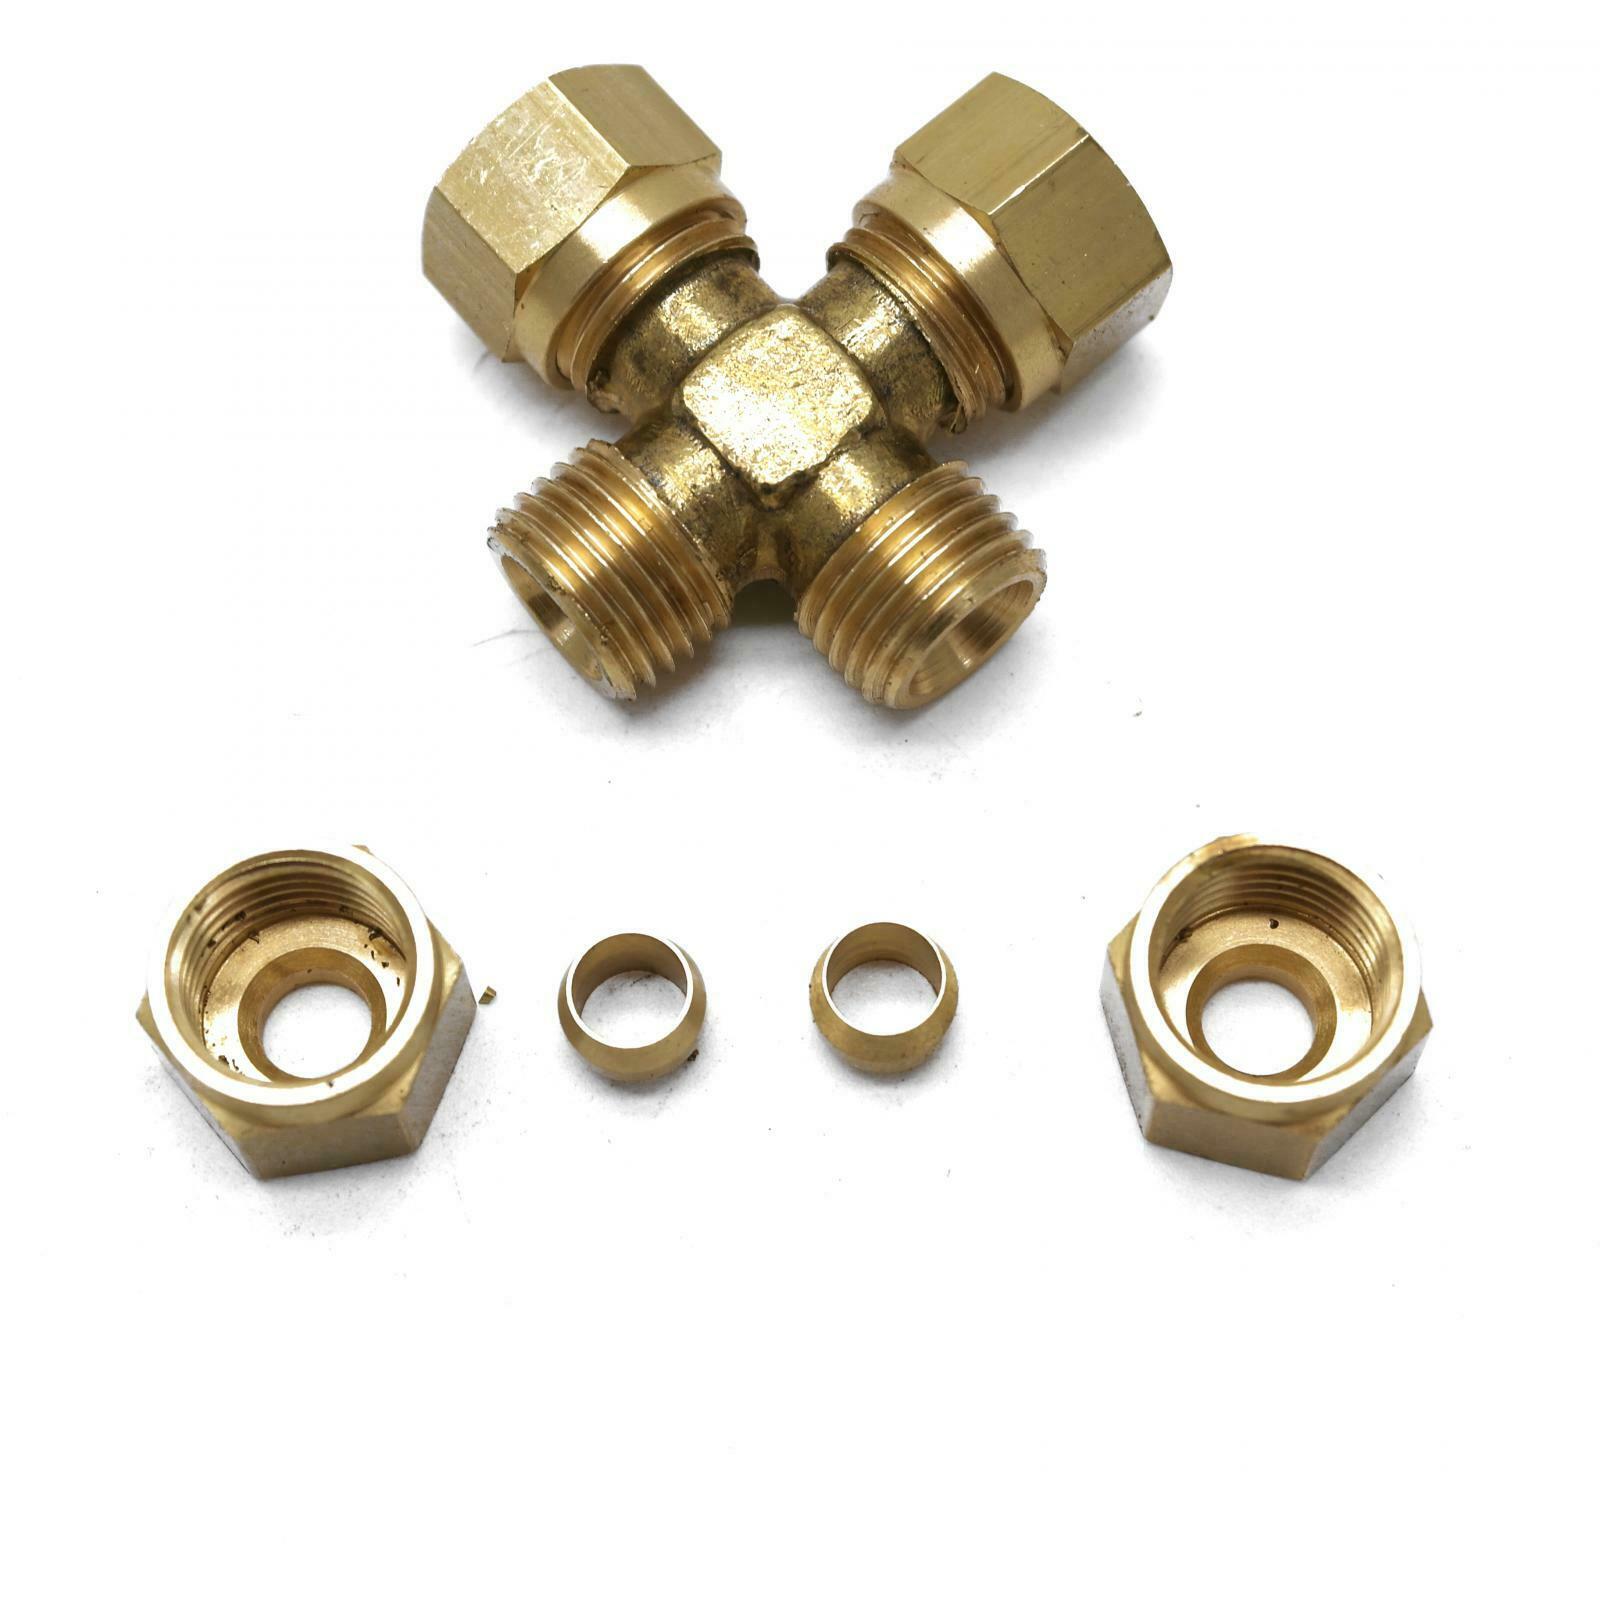 British Made 8mm Equal 4 Way Cross Brass Compression Fitting 